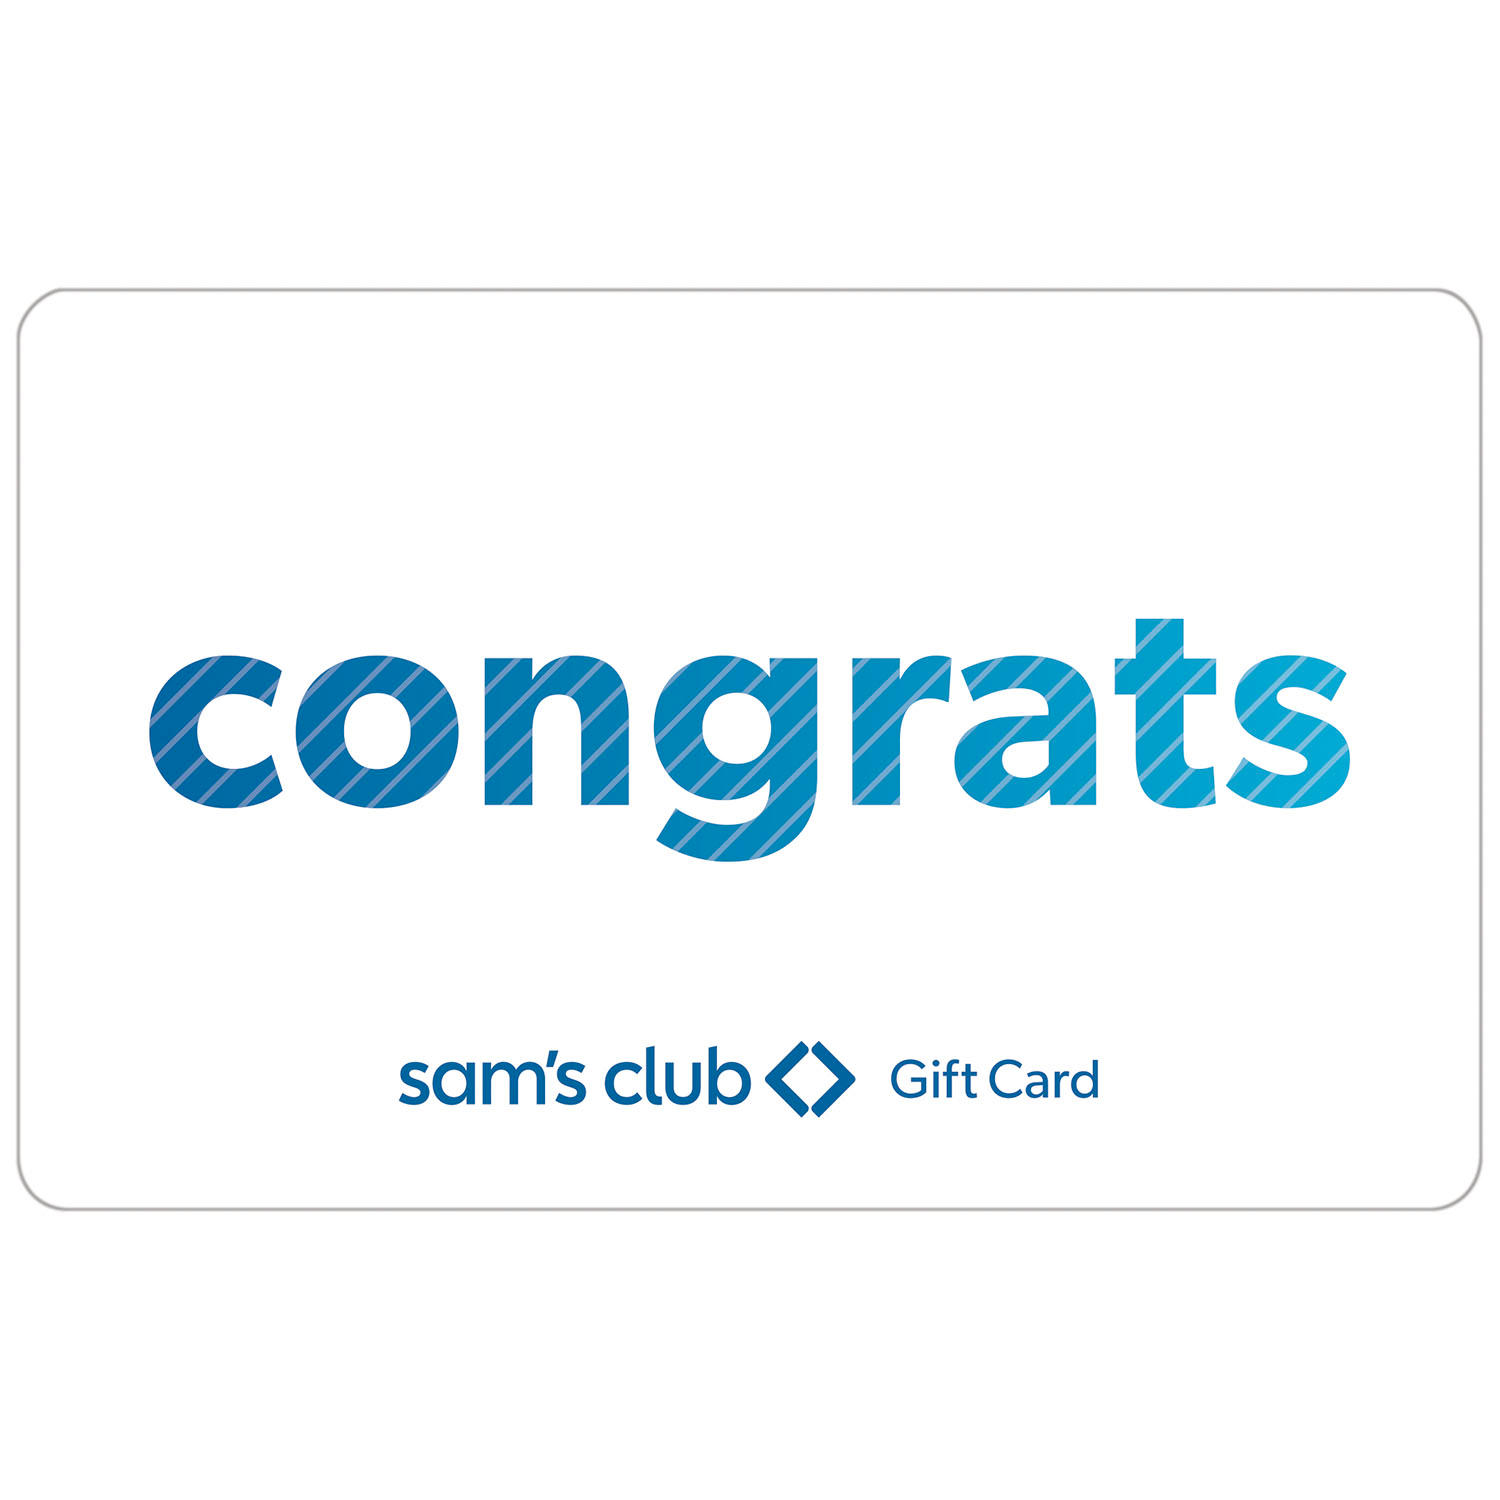 Sam's Club Everyday Congrats Gift Card -$50